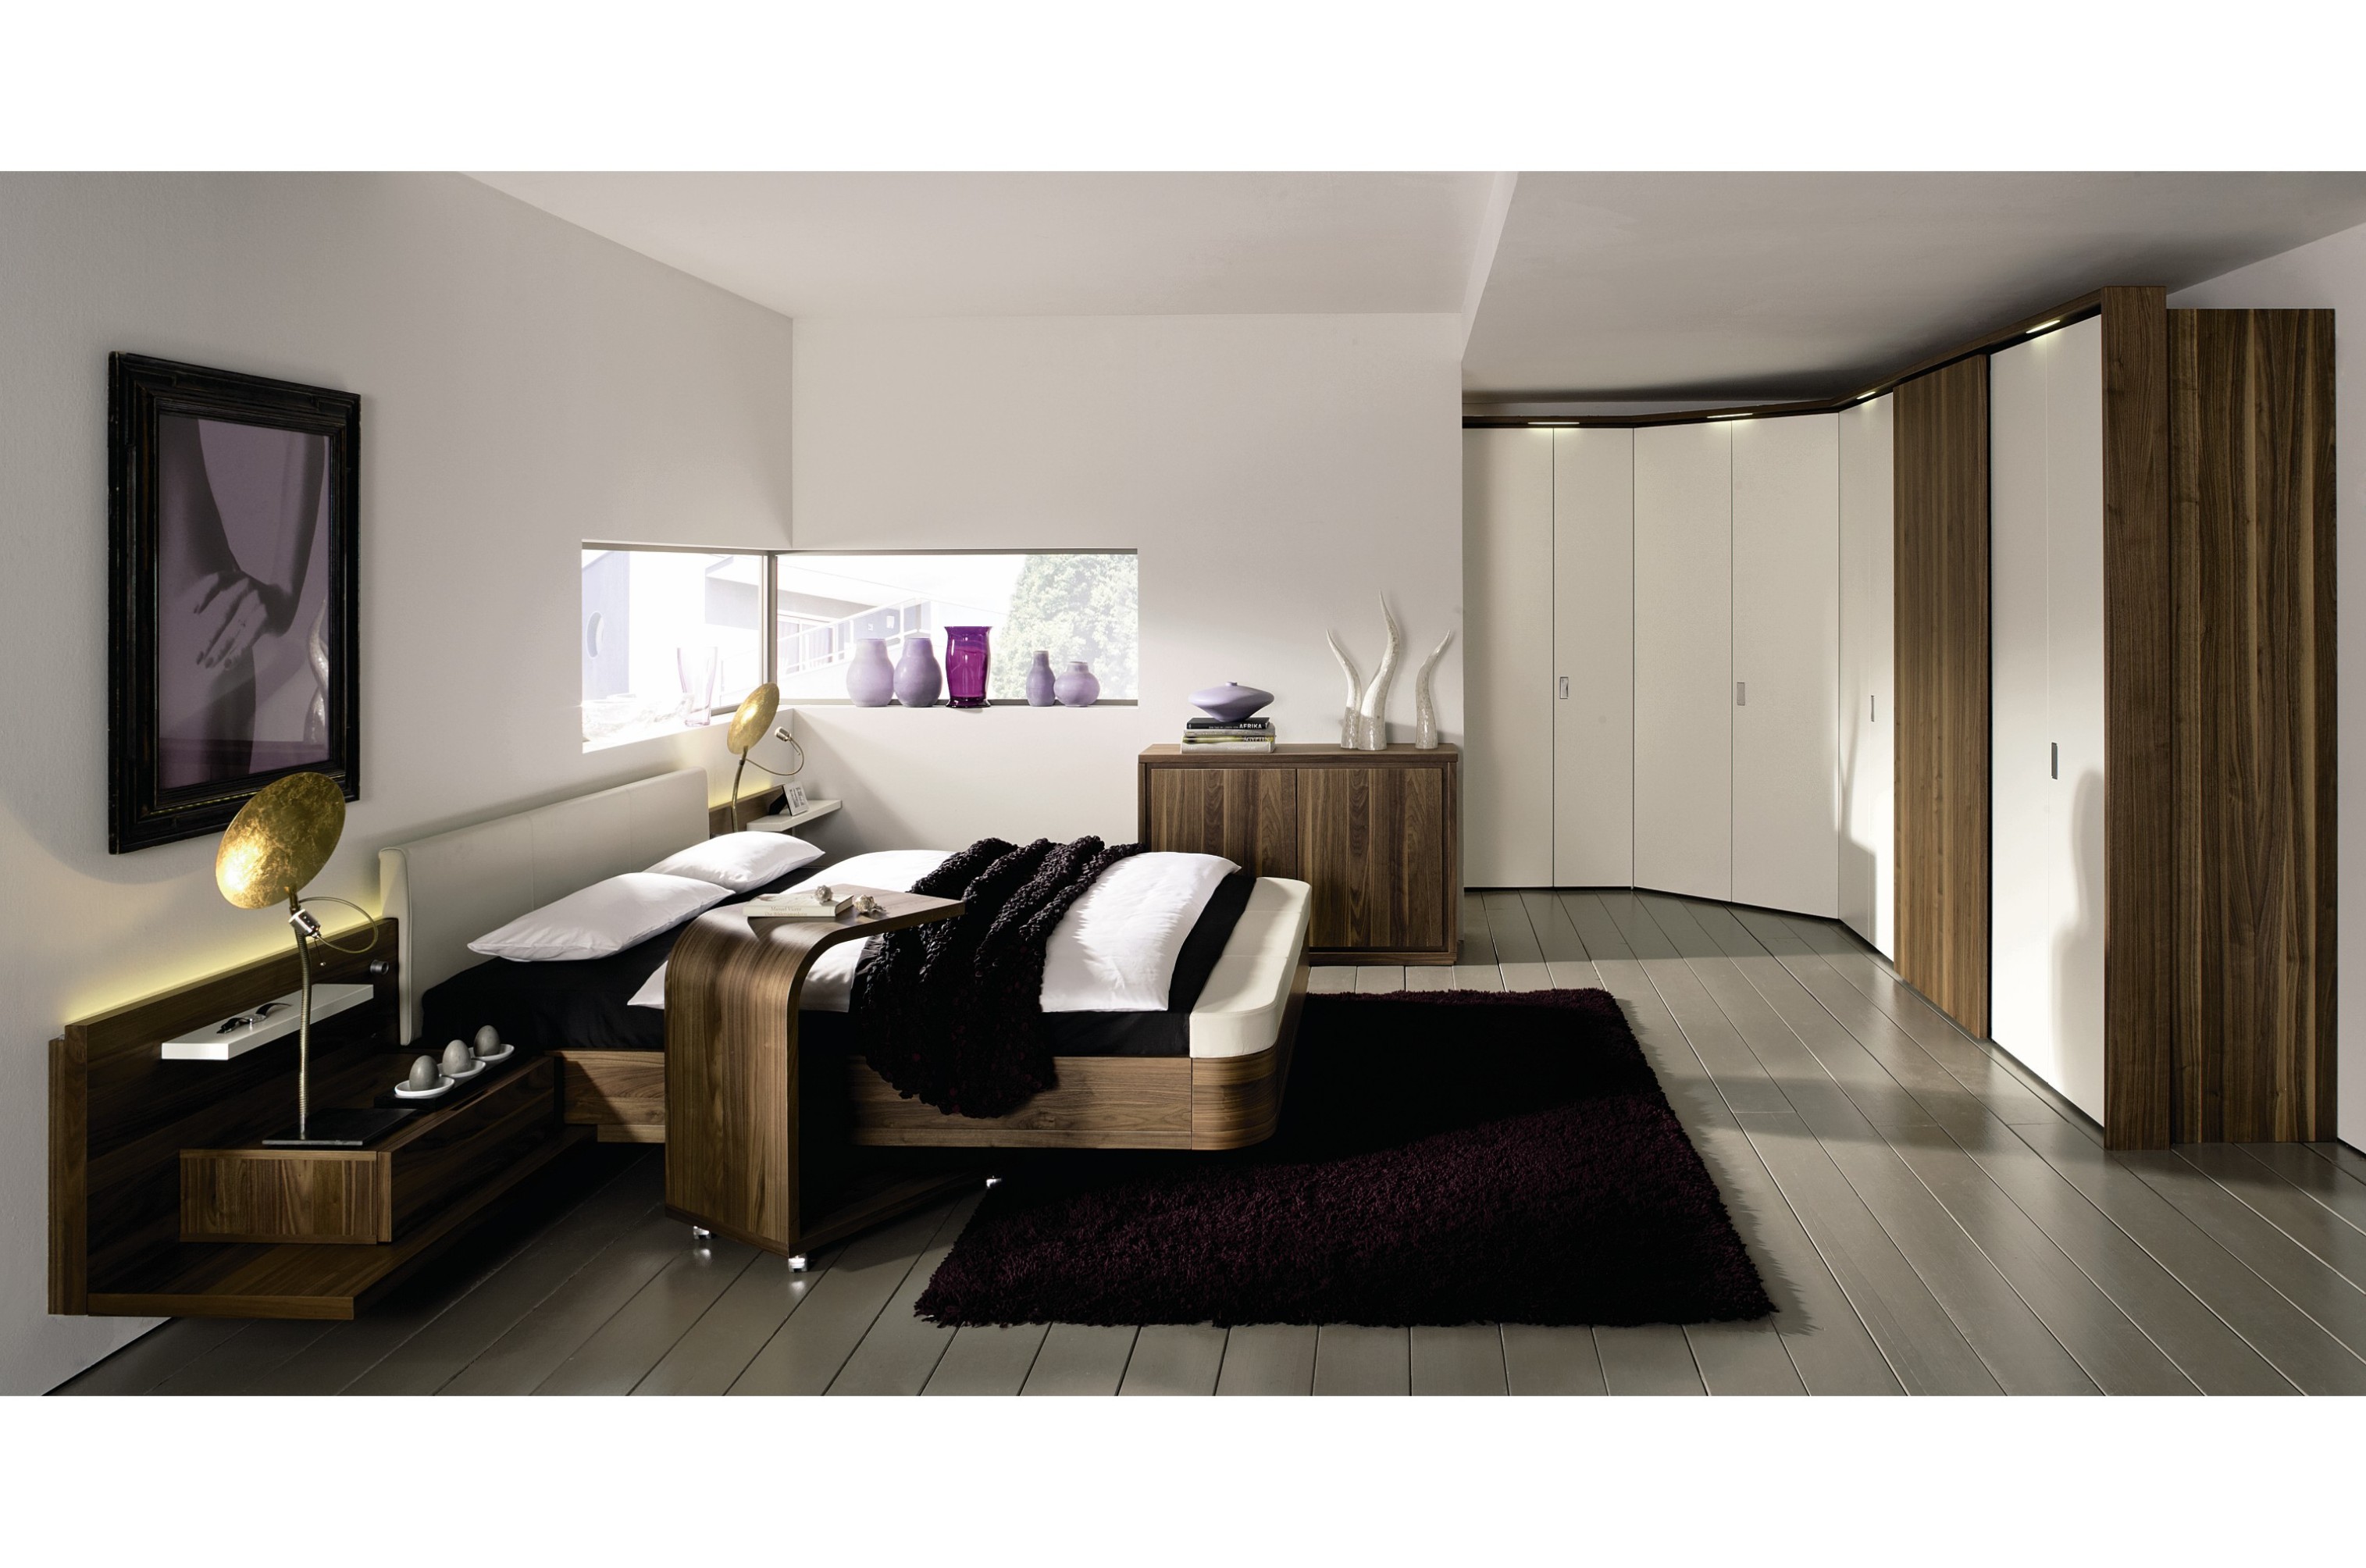 ikea bedroom furniture for small spaces photo - 7